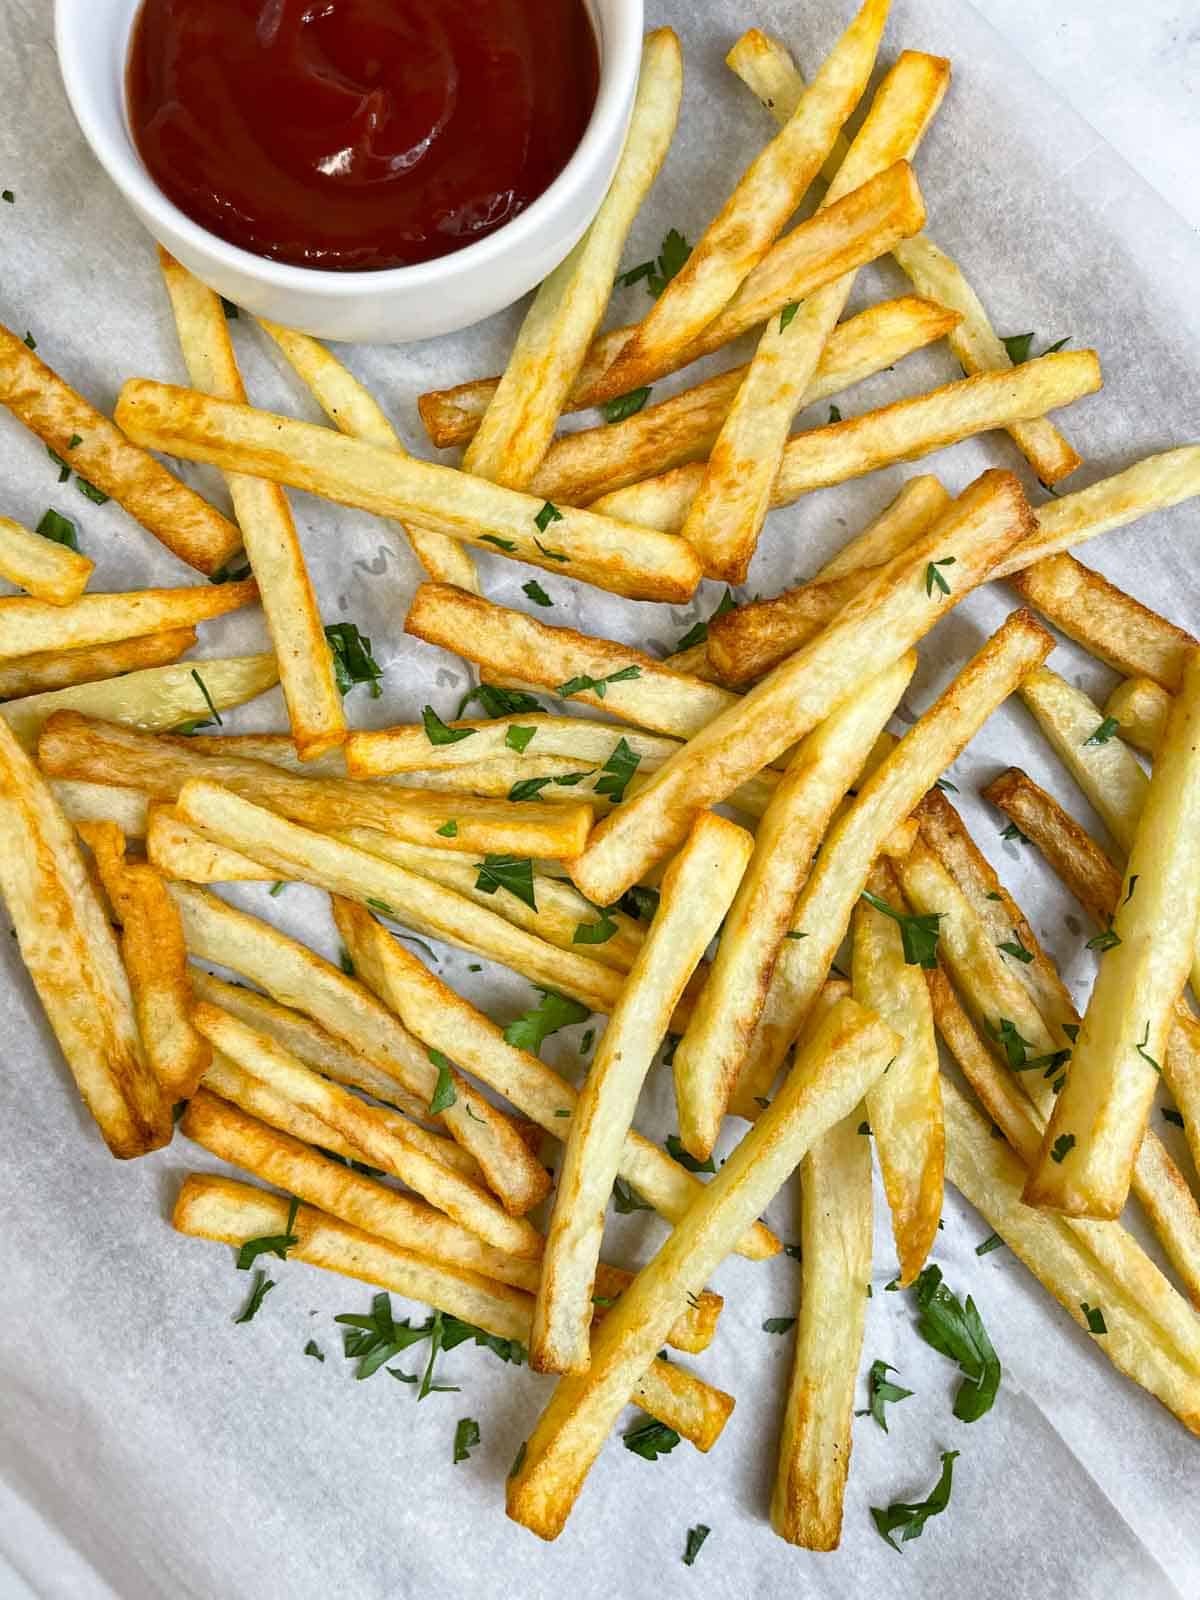 homemade french fries served with ketchup